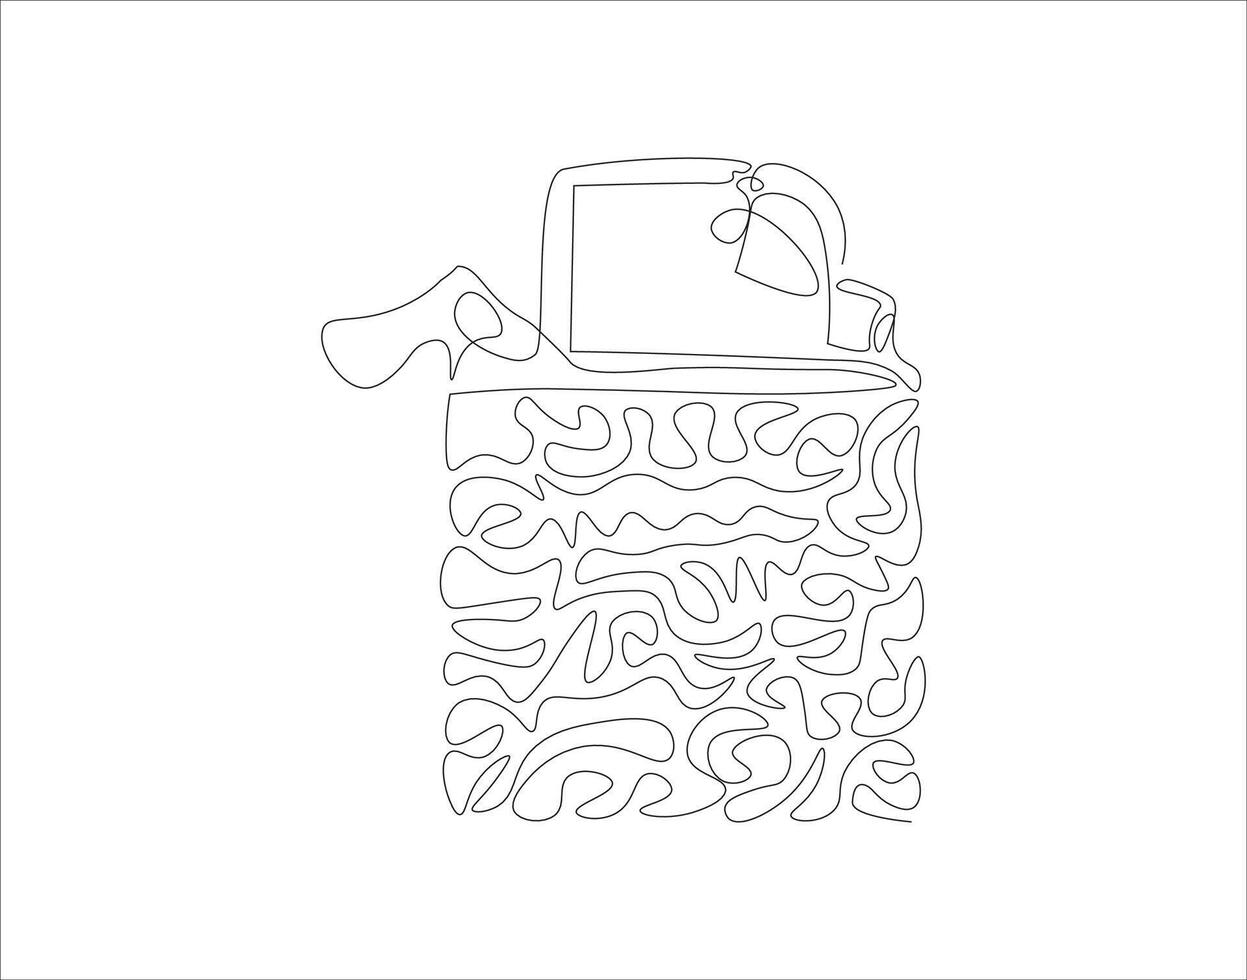 Continuous Line Drawing Of Lighter. One Line Of Lighter. Lighter Continuous Line Art. Editable Outline. vector